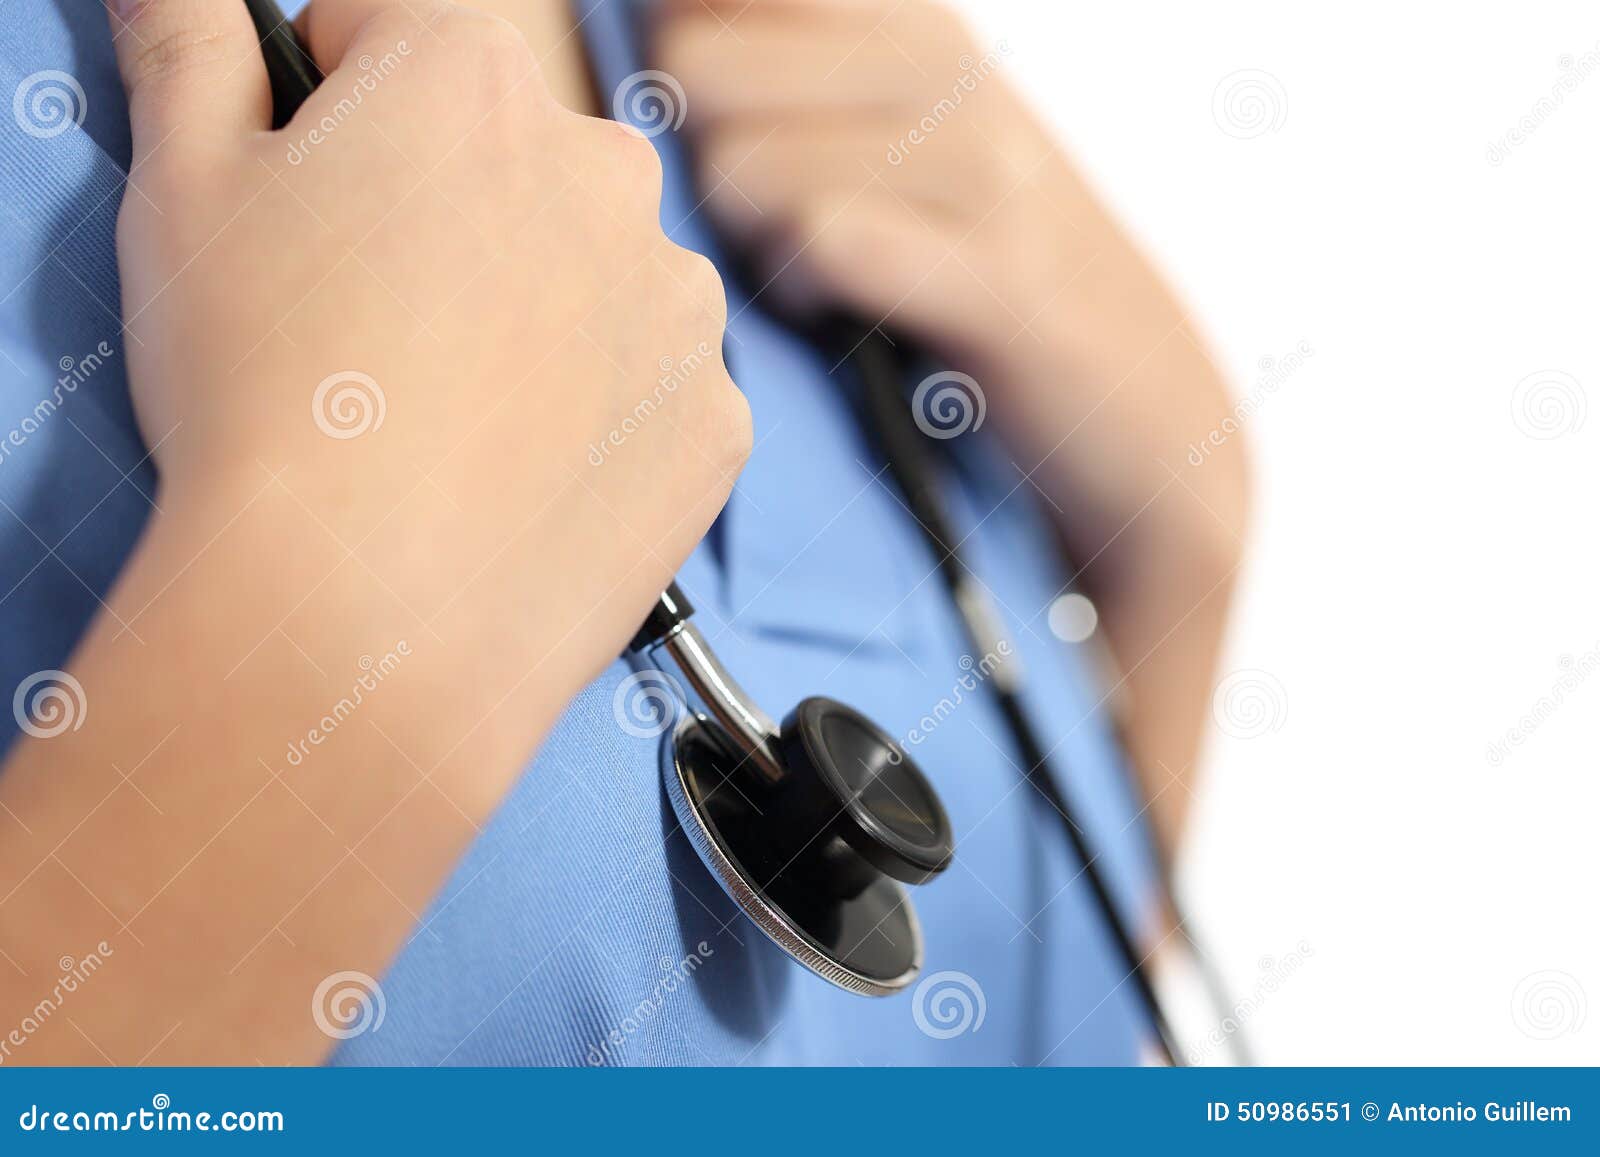 close up of a nurse hands with stethoscope